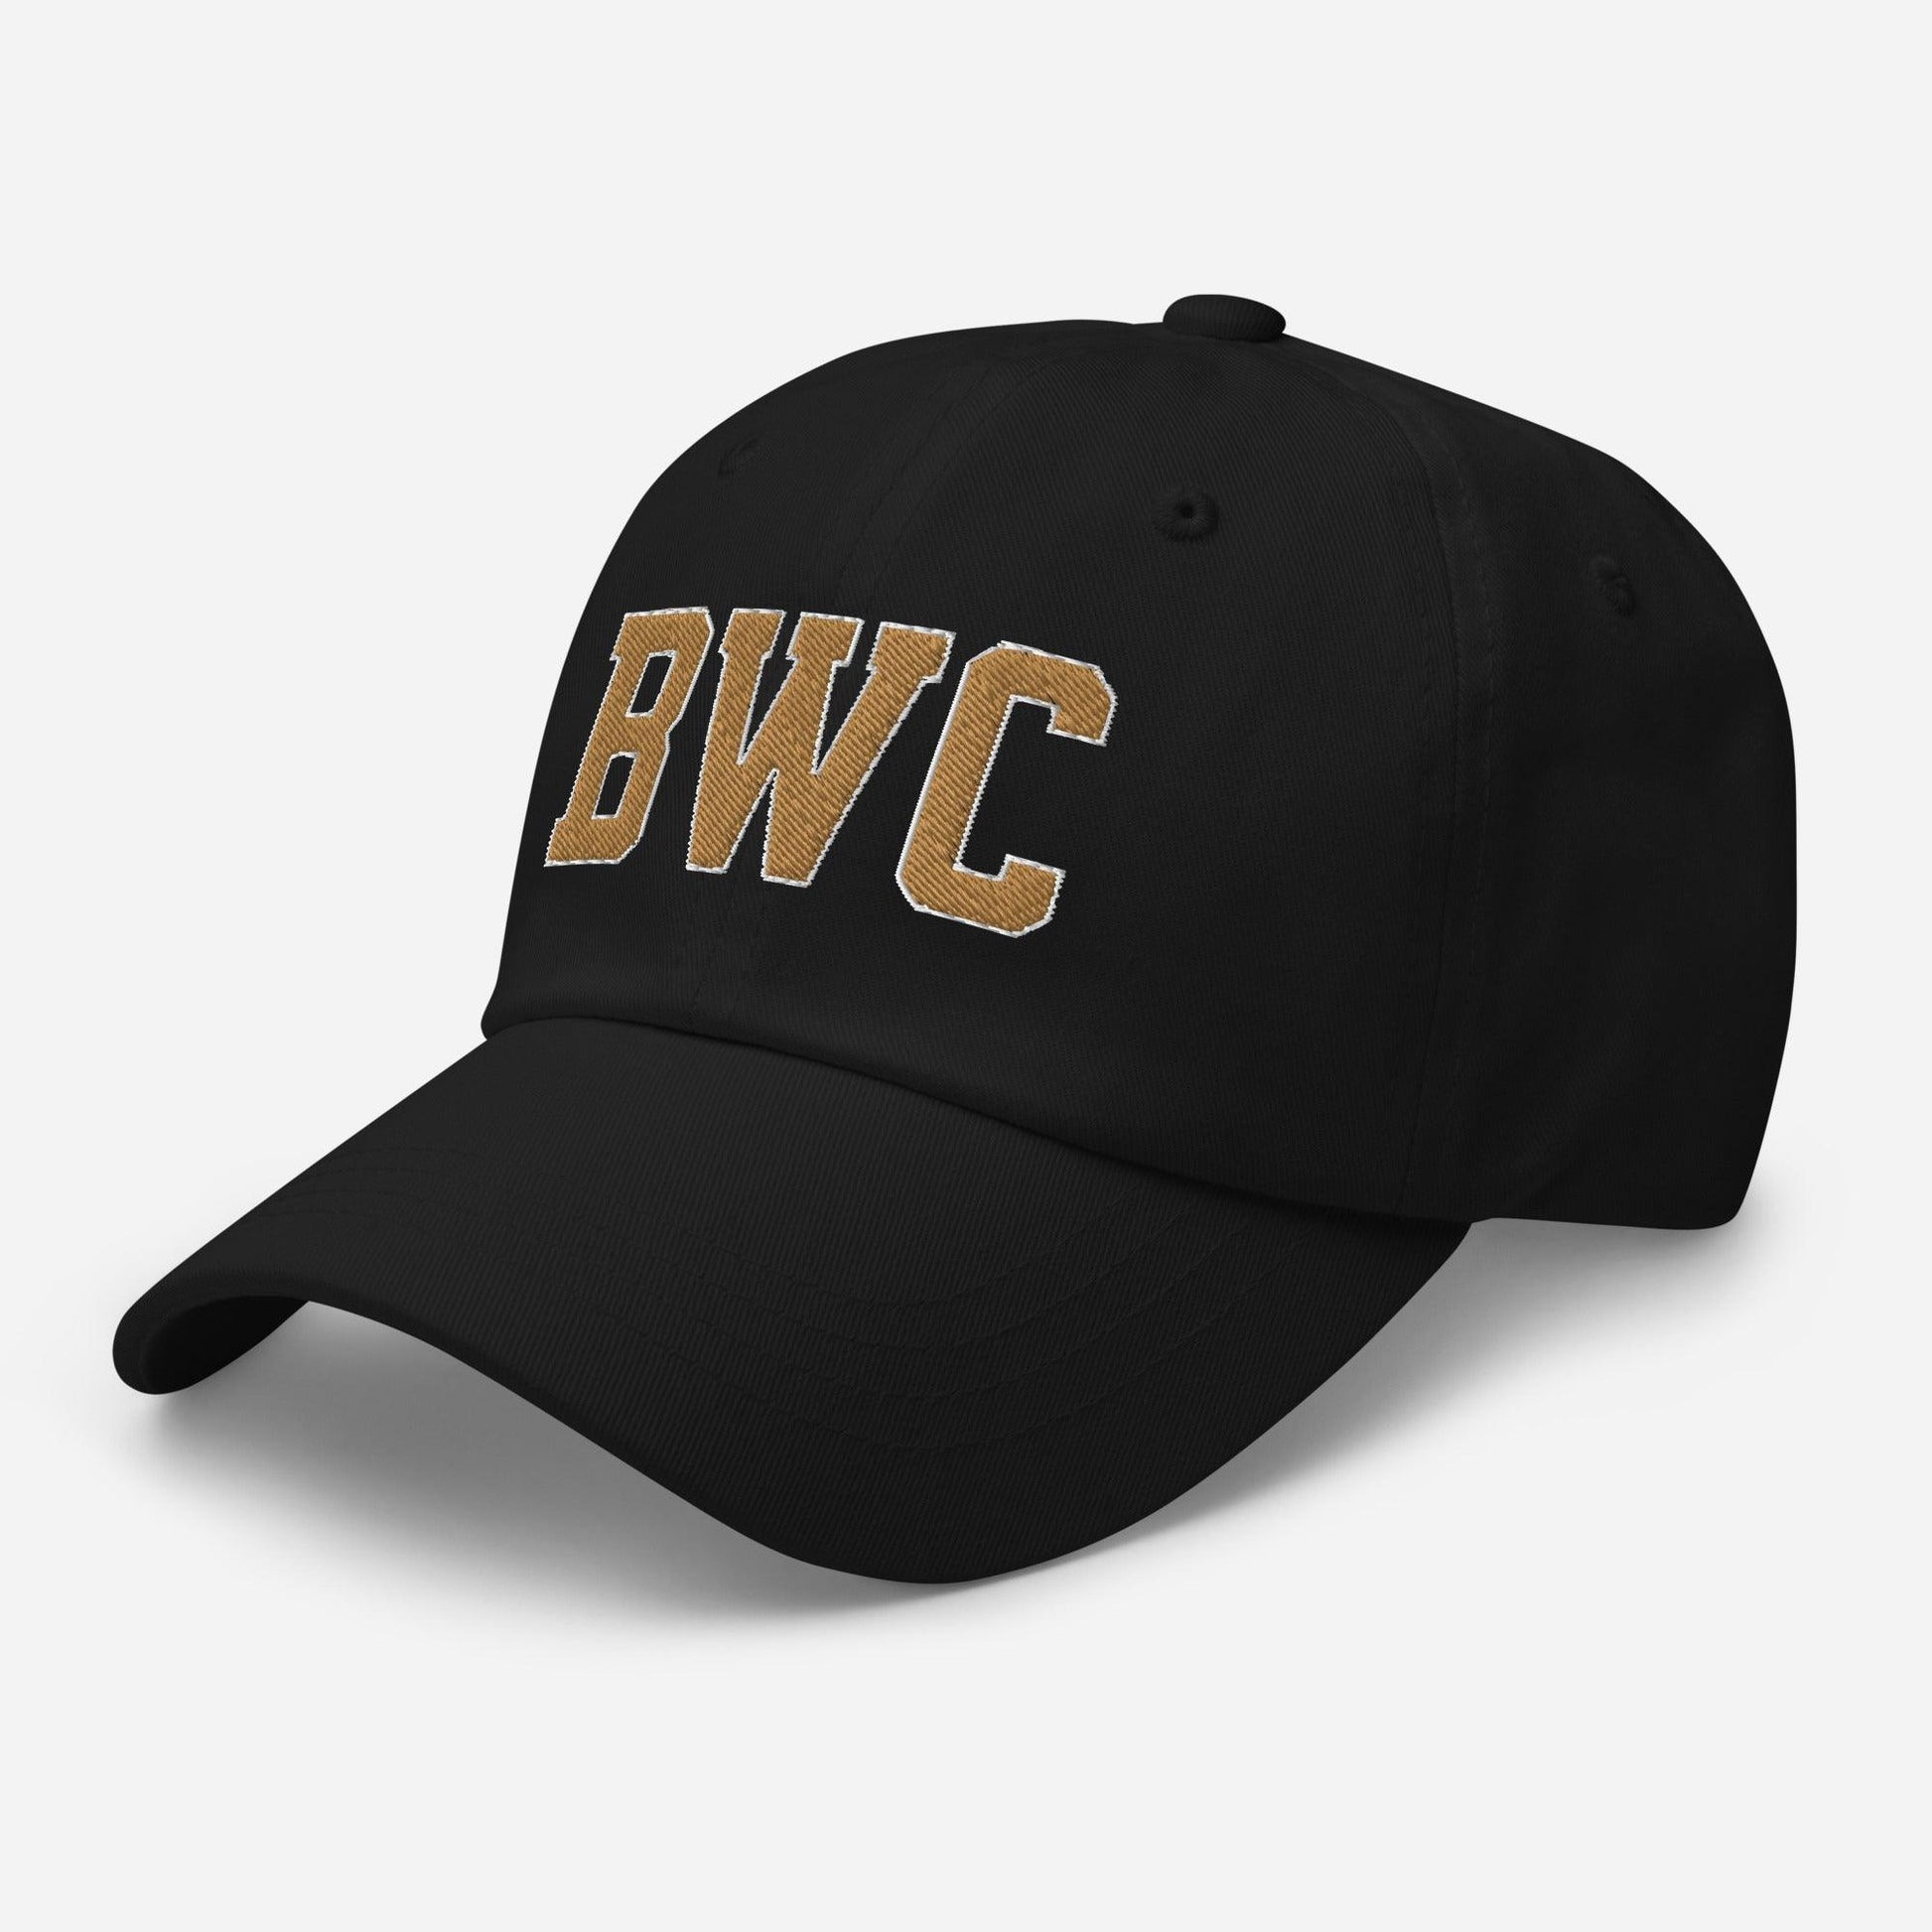 Basgiath War College Riorson Embroidered Hat - The Bean Workshop - dad hat, embroidered, fourth wing, hat, rebecca yarros